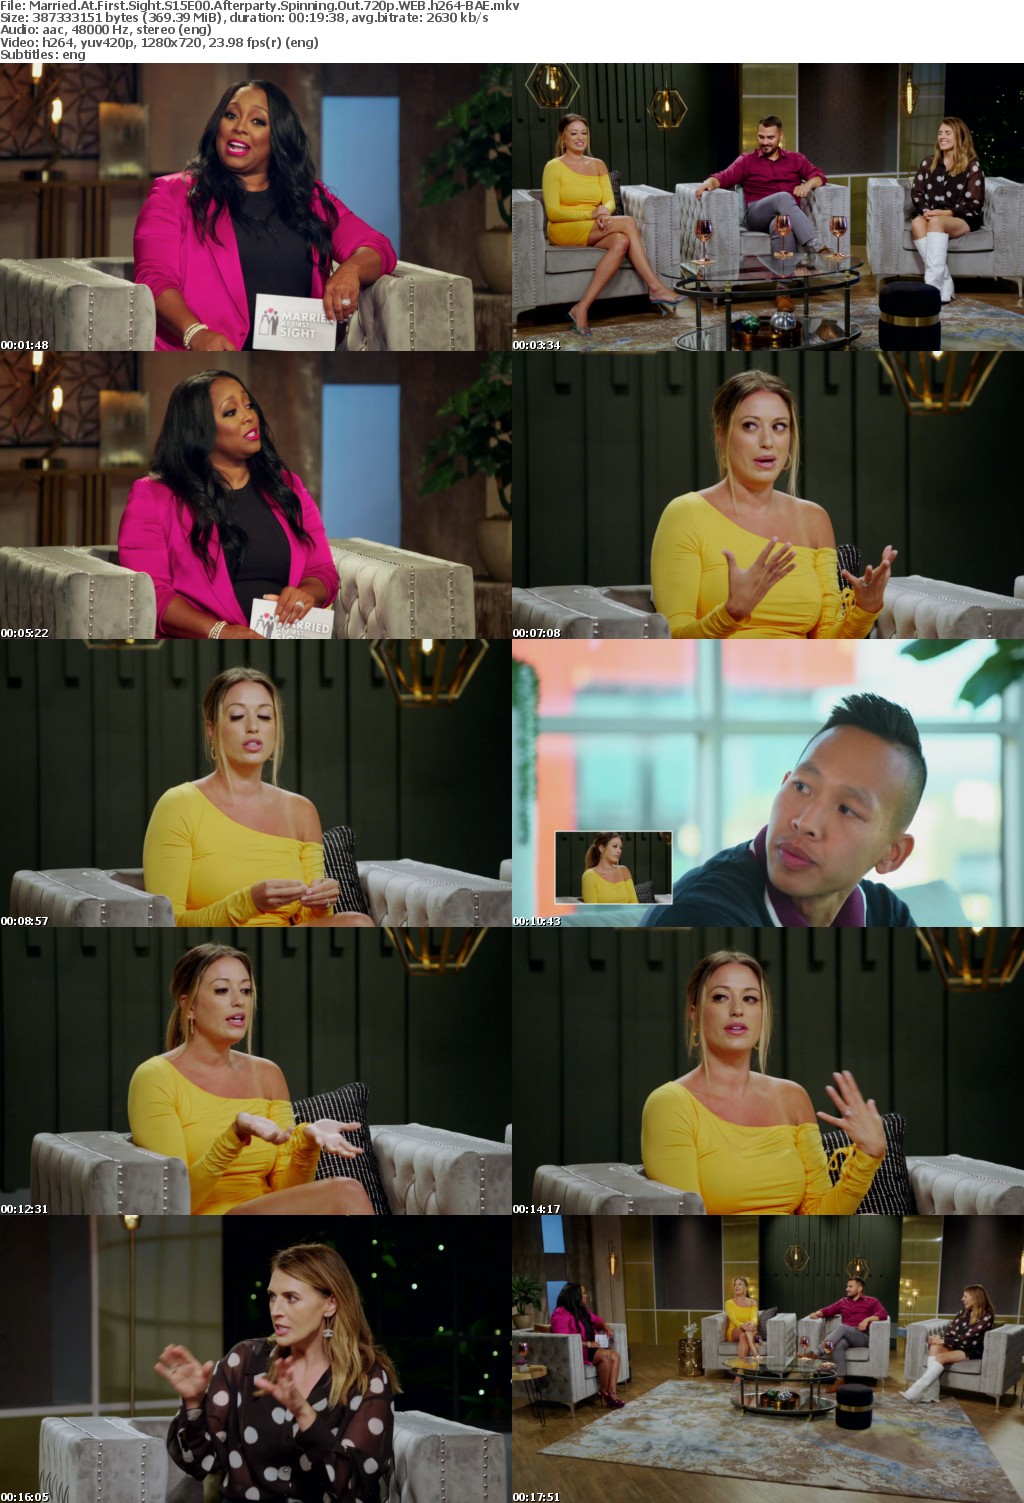 Married At First Sight S15E00 Afterparty Spinning Out 720p WEB h264-BAE